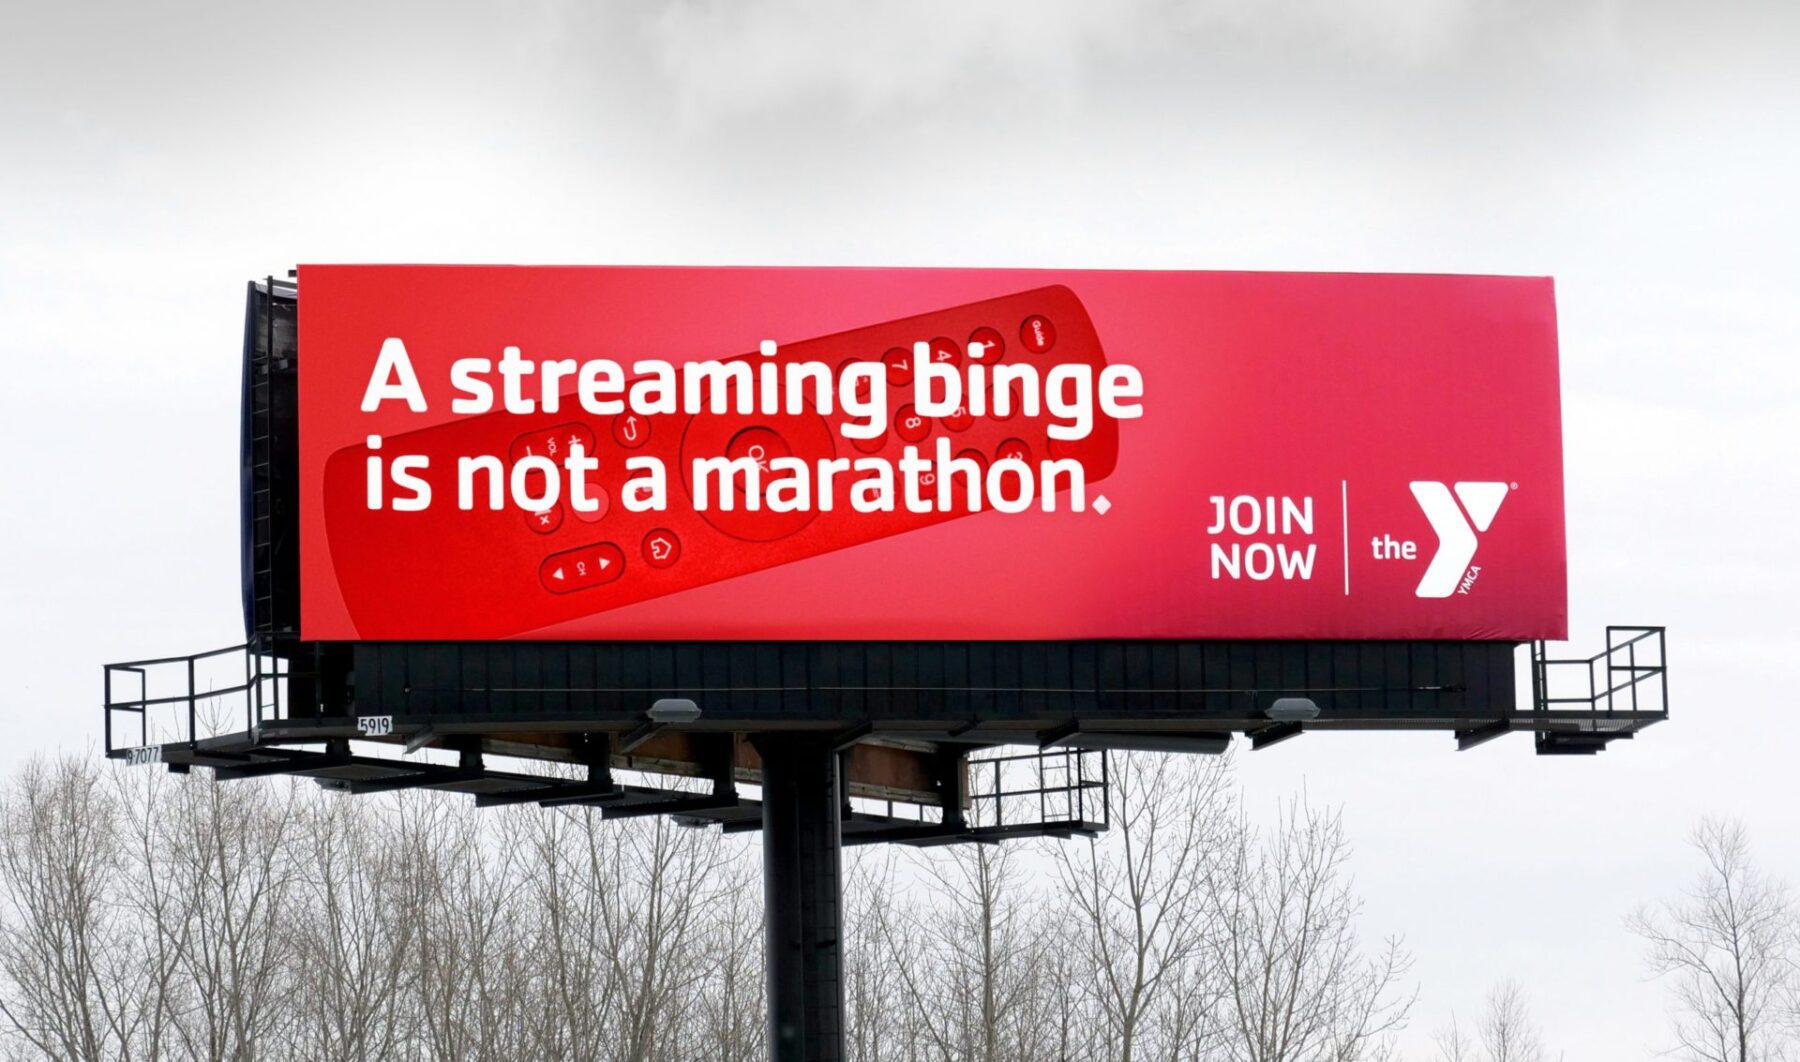 Out of home bulletin with TV remote control and headline "A streaming binge is not a marathon."